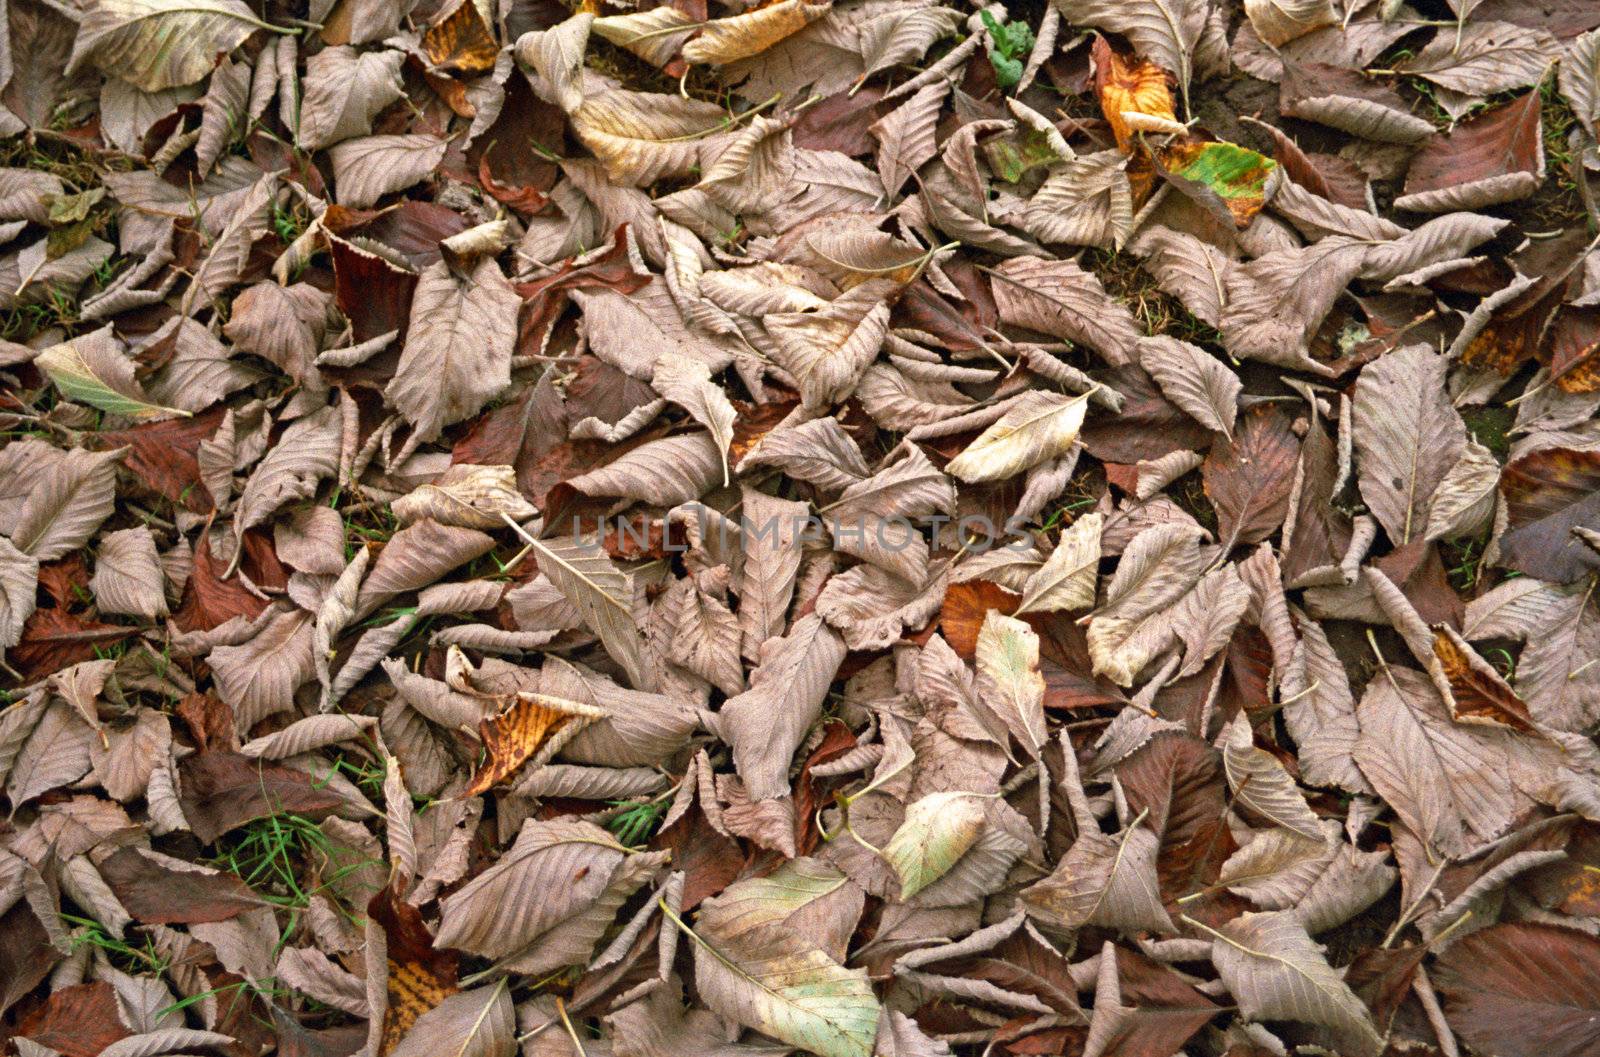 Fallen leaves cover the ground at the onset of Winter